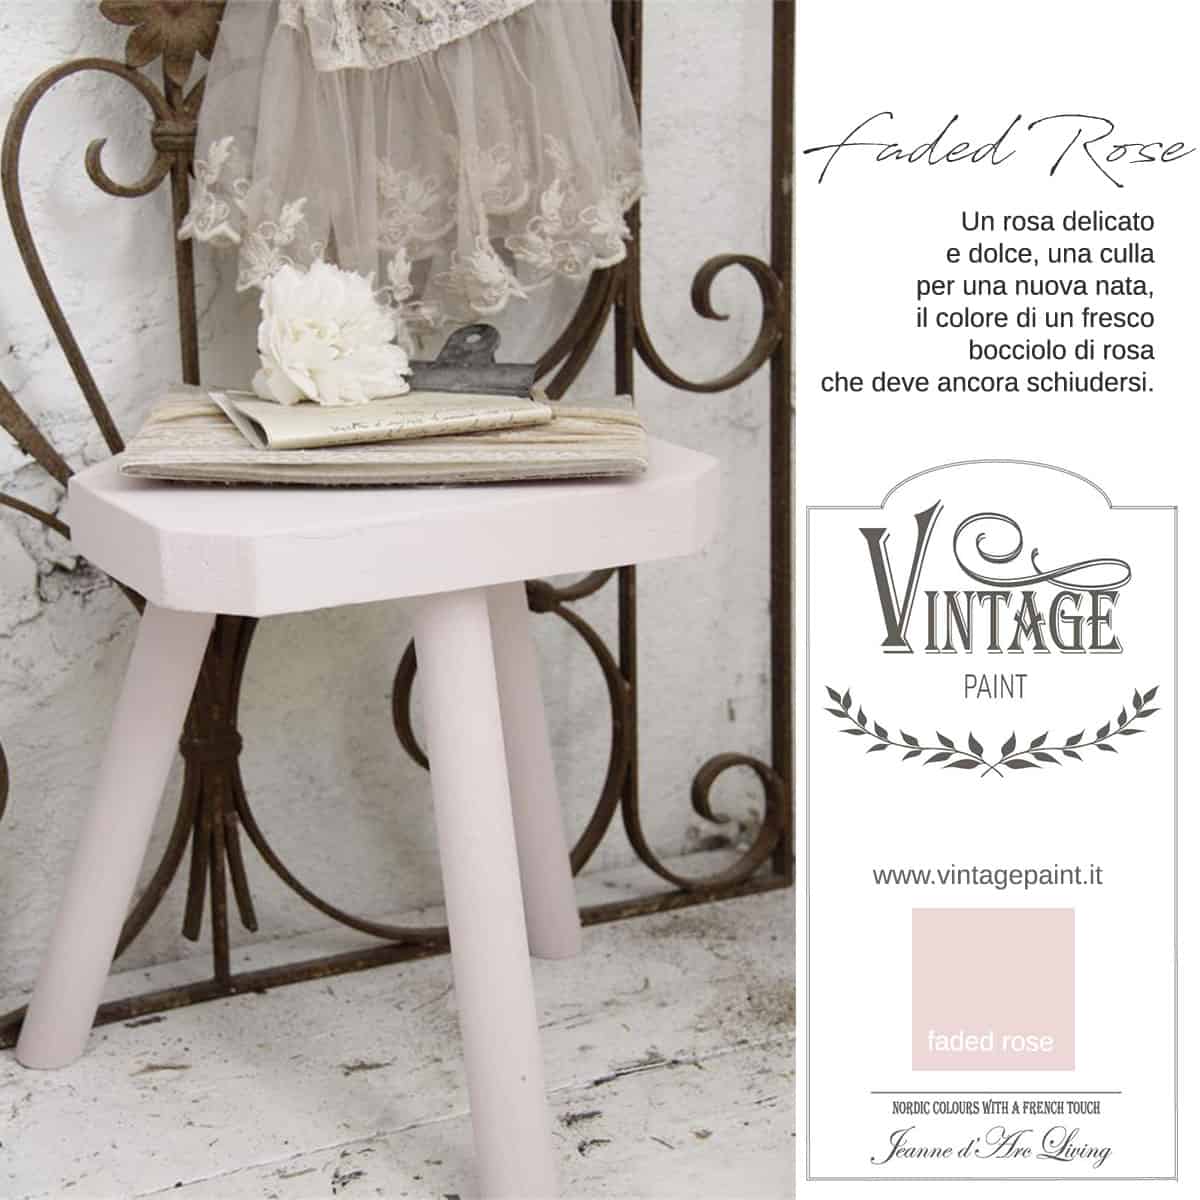 faded rose rosa vintage chalk paint vernici shabby chic autentico look gesso